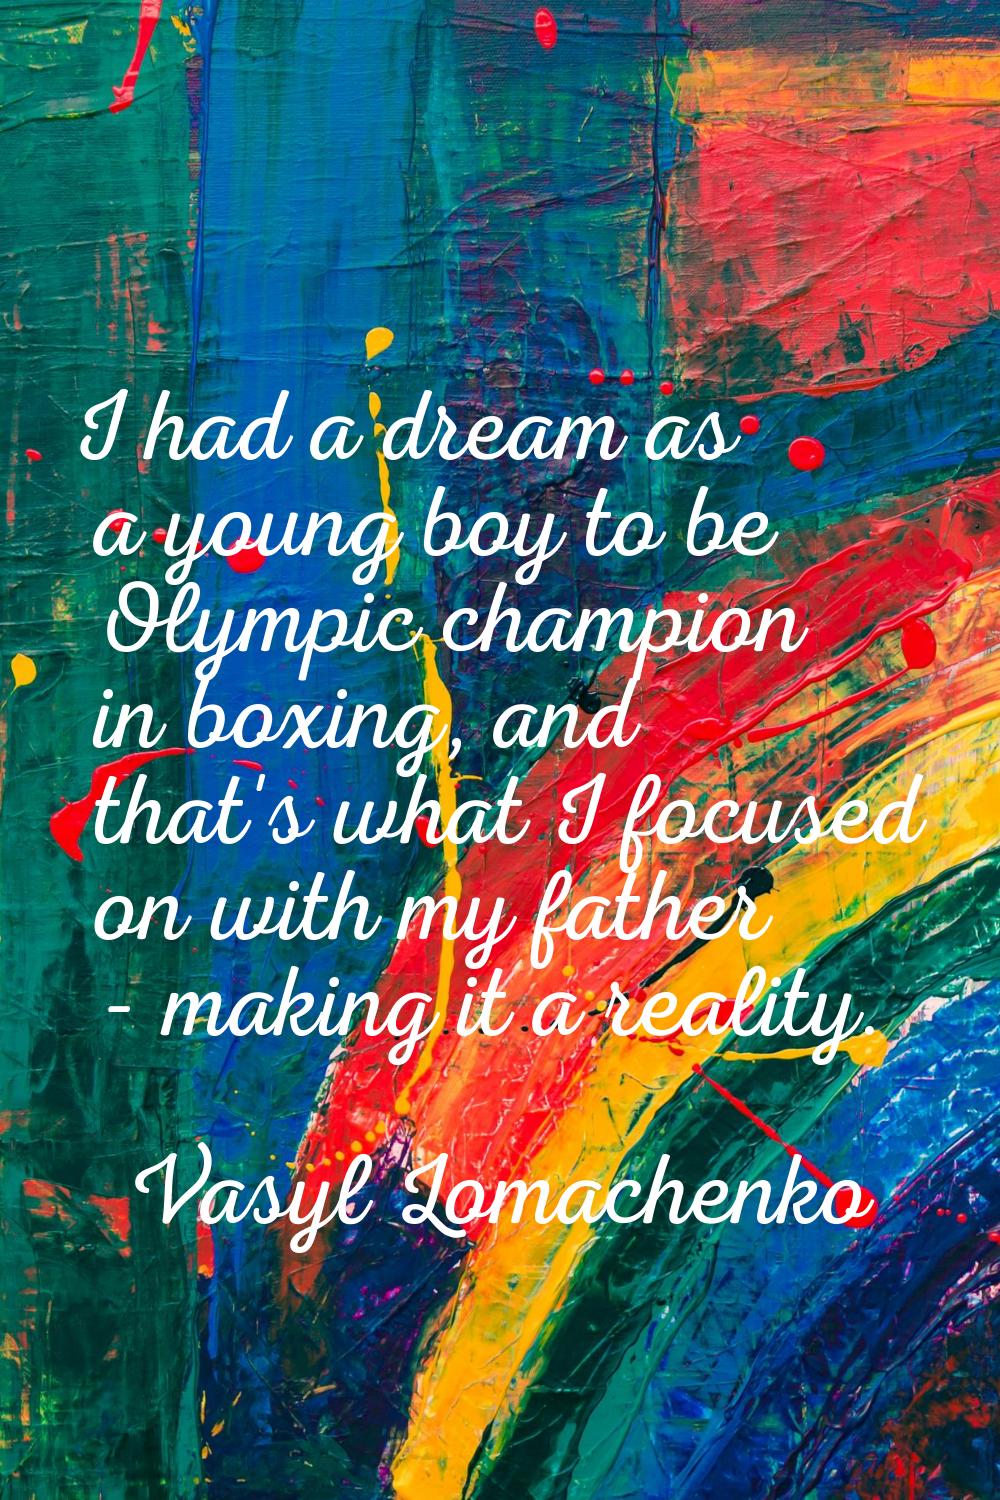 I had a dream as a young boy to be Olympic champion in boxing, and that's what I focused on with my